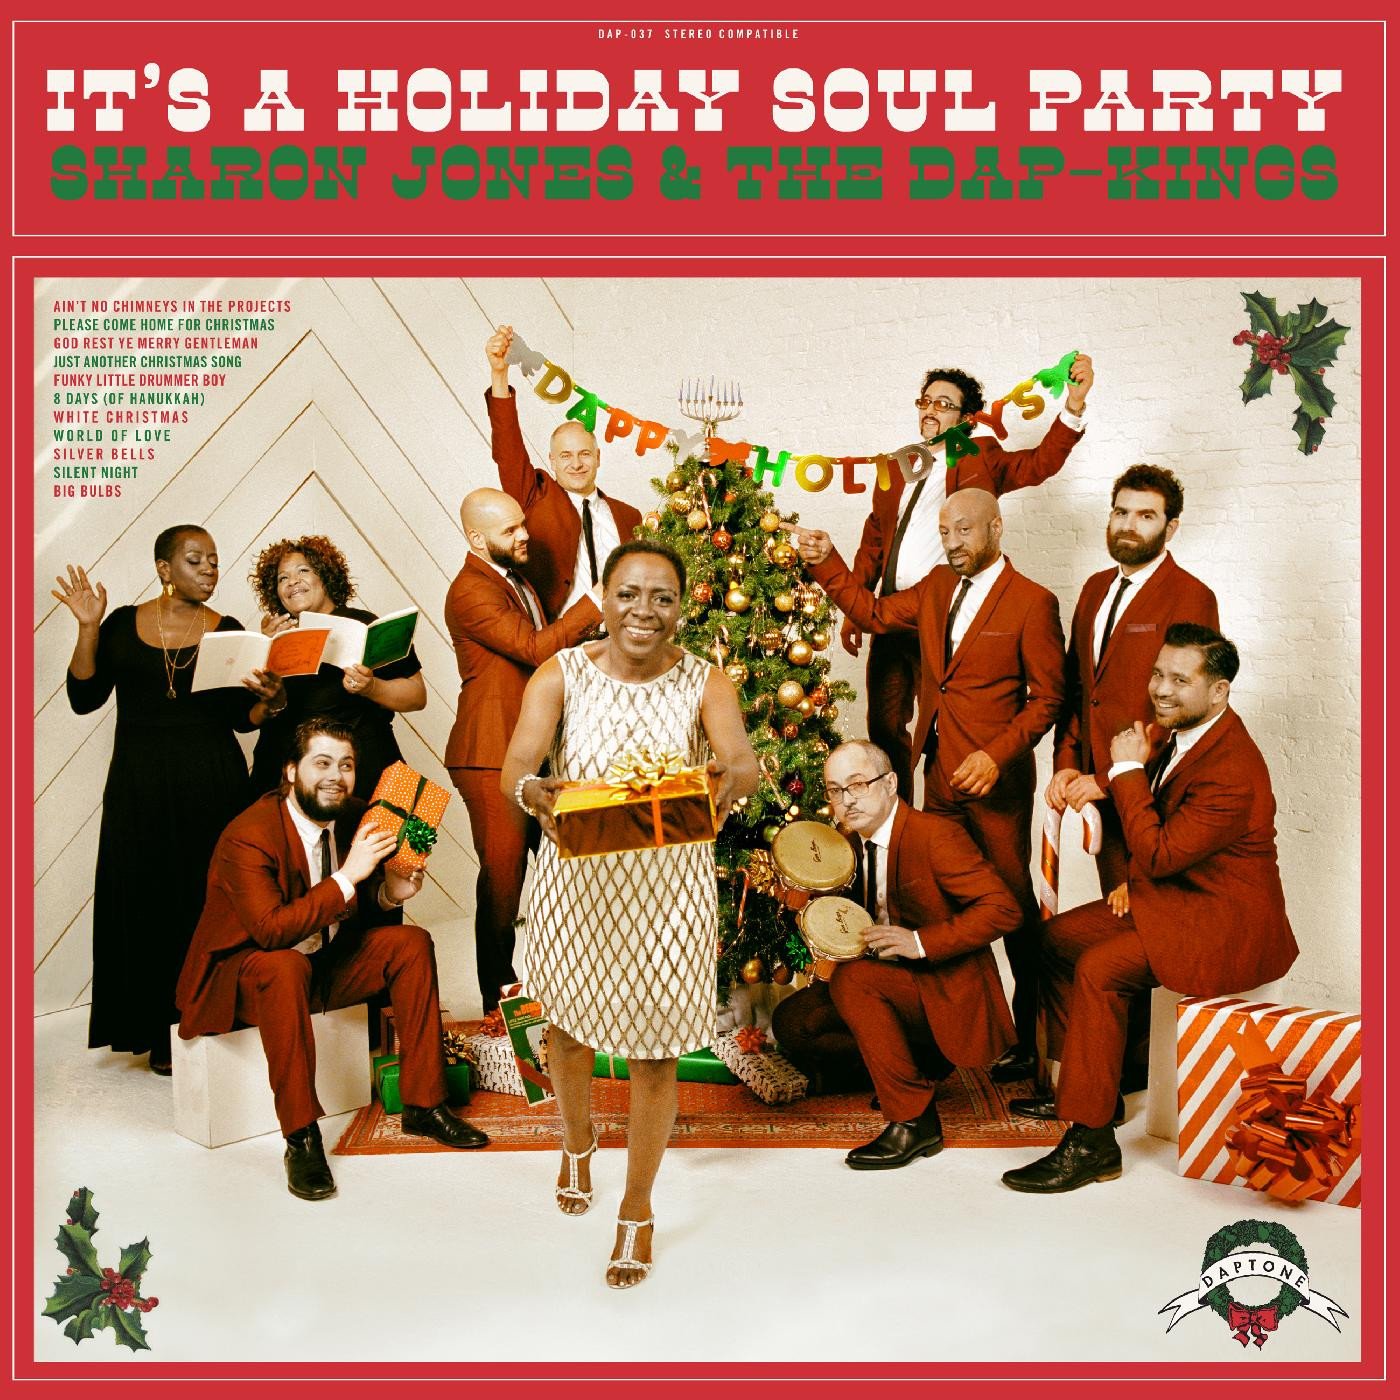 Sharon Jones and Dap Kings - It's a Holiday Soul Party